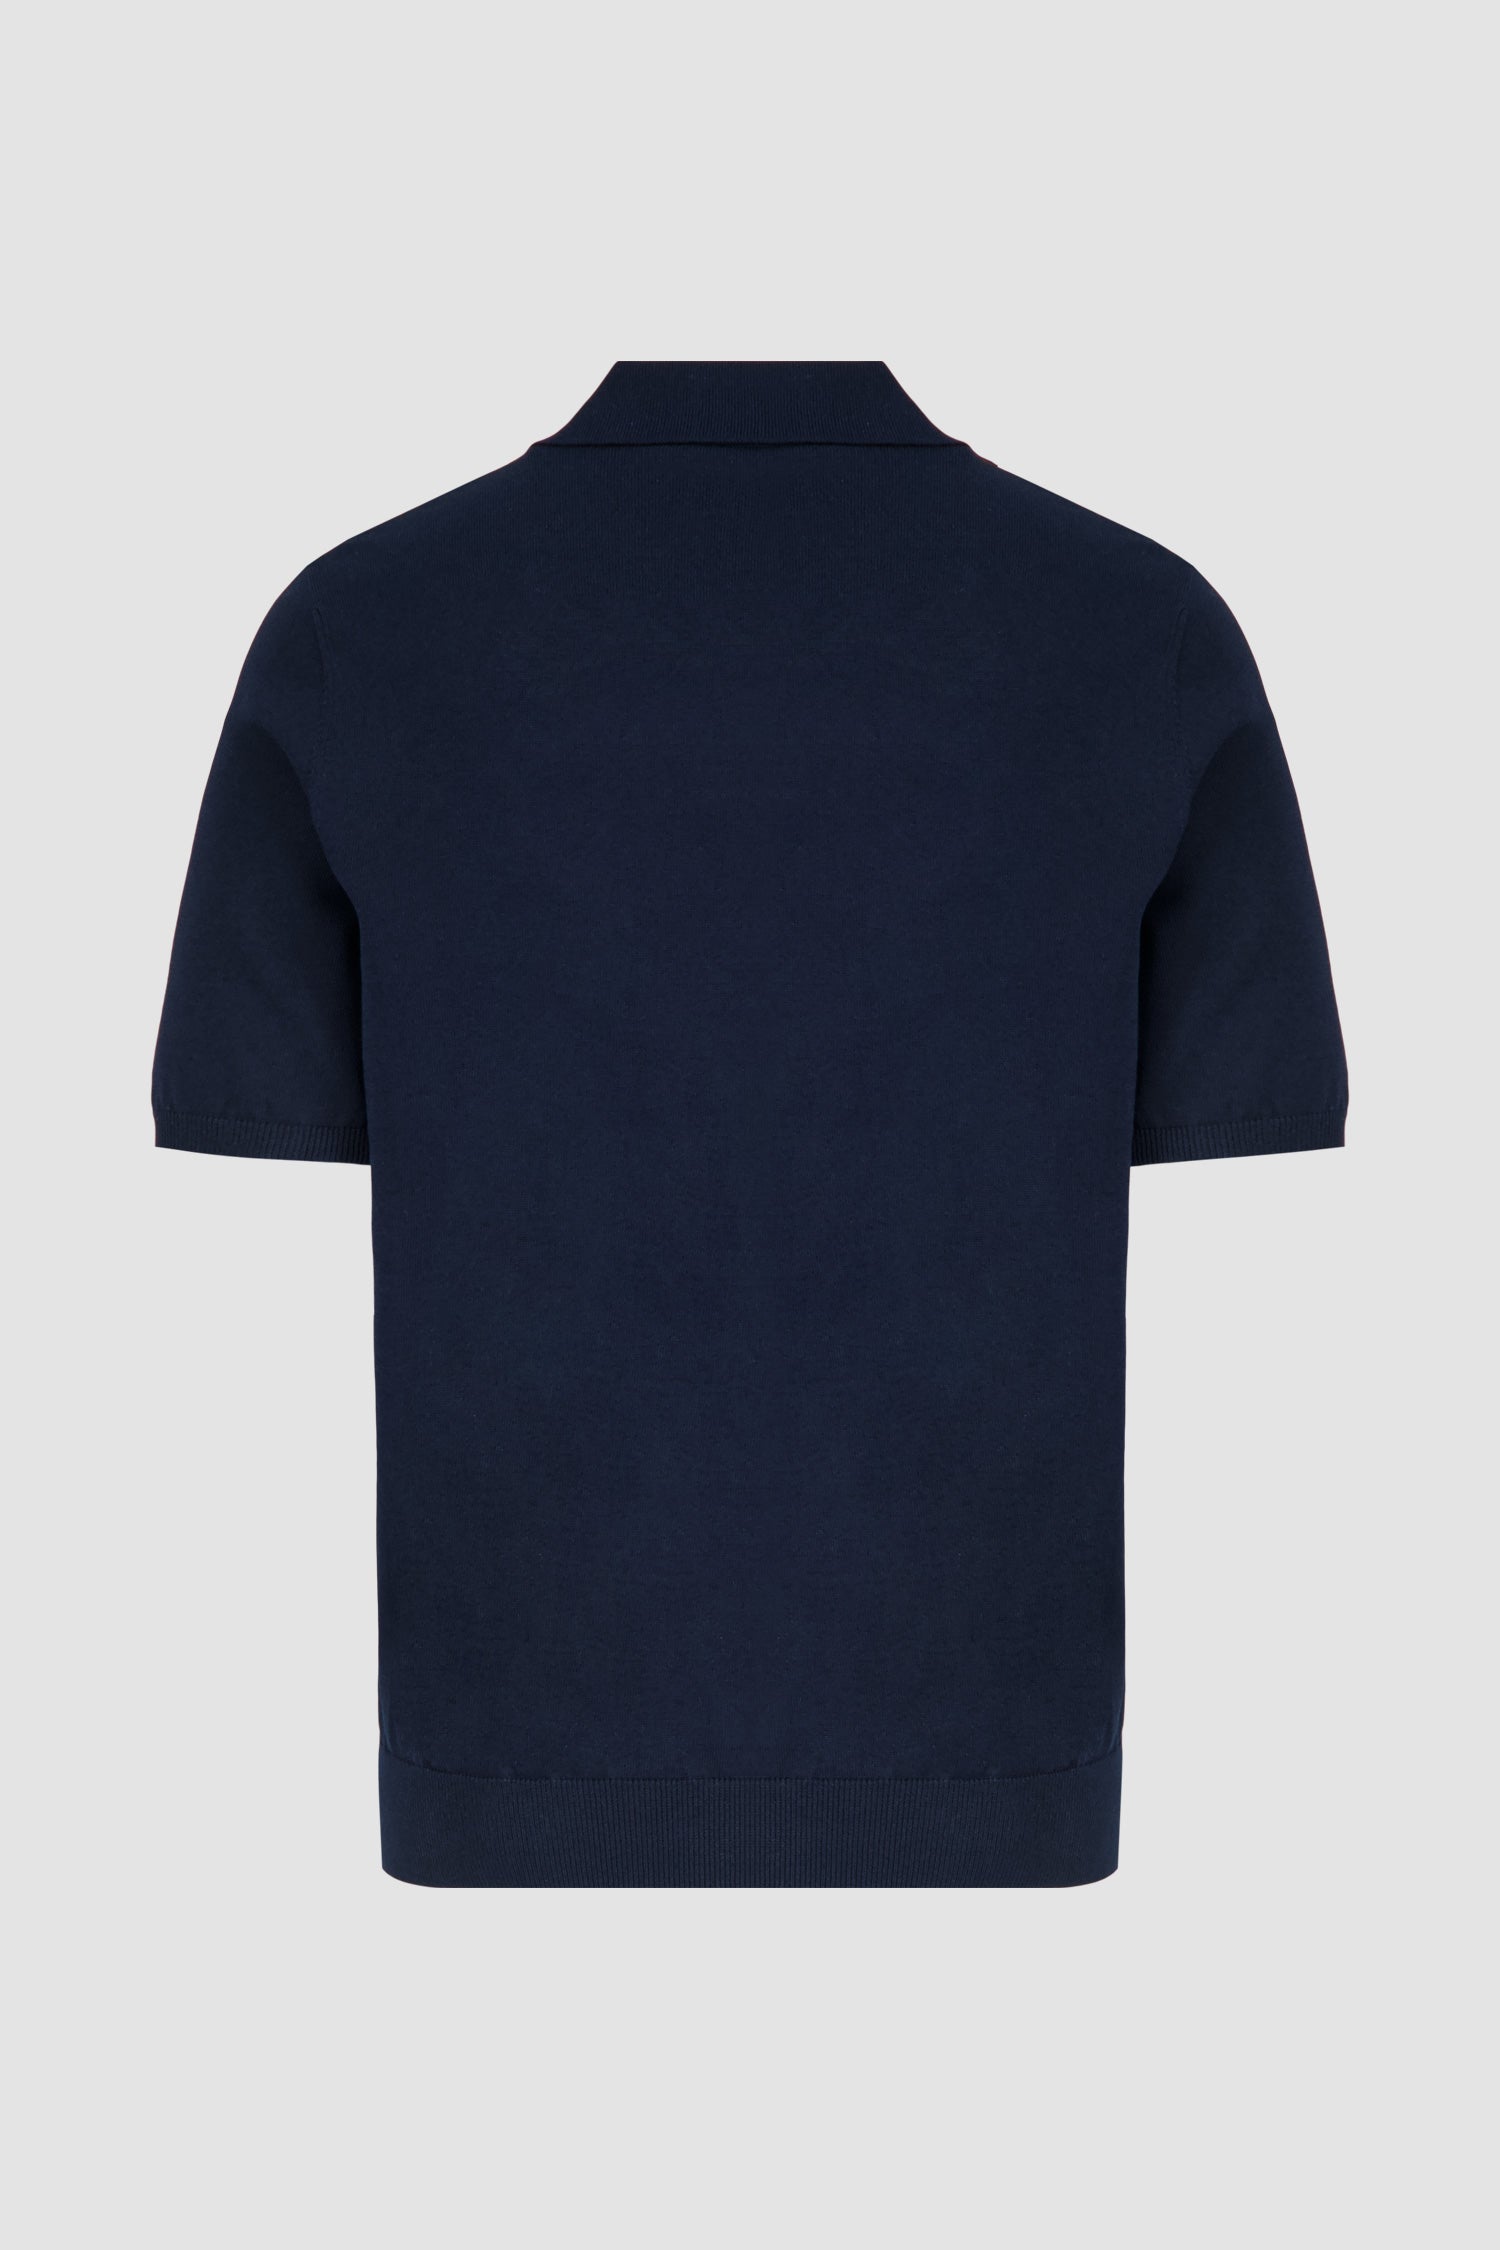 Zilli Navy Zip Short Sleeves Polo with Croc